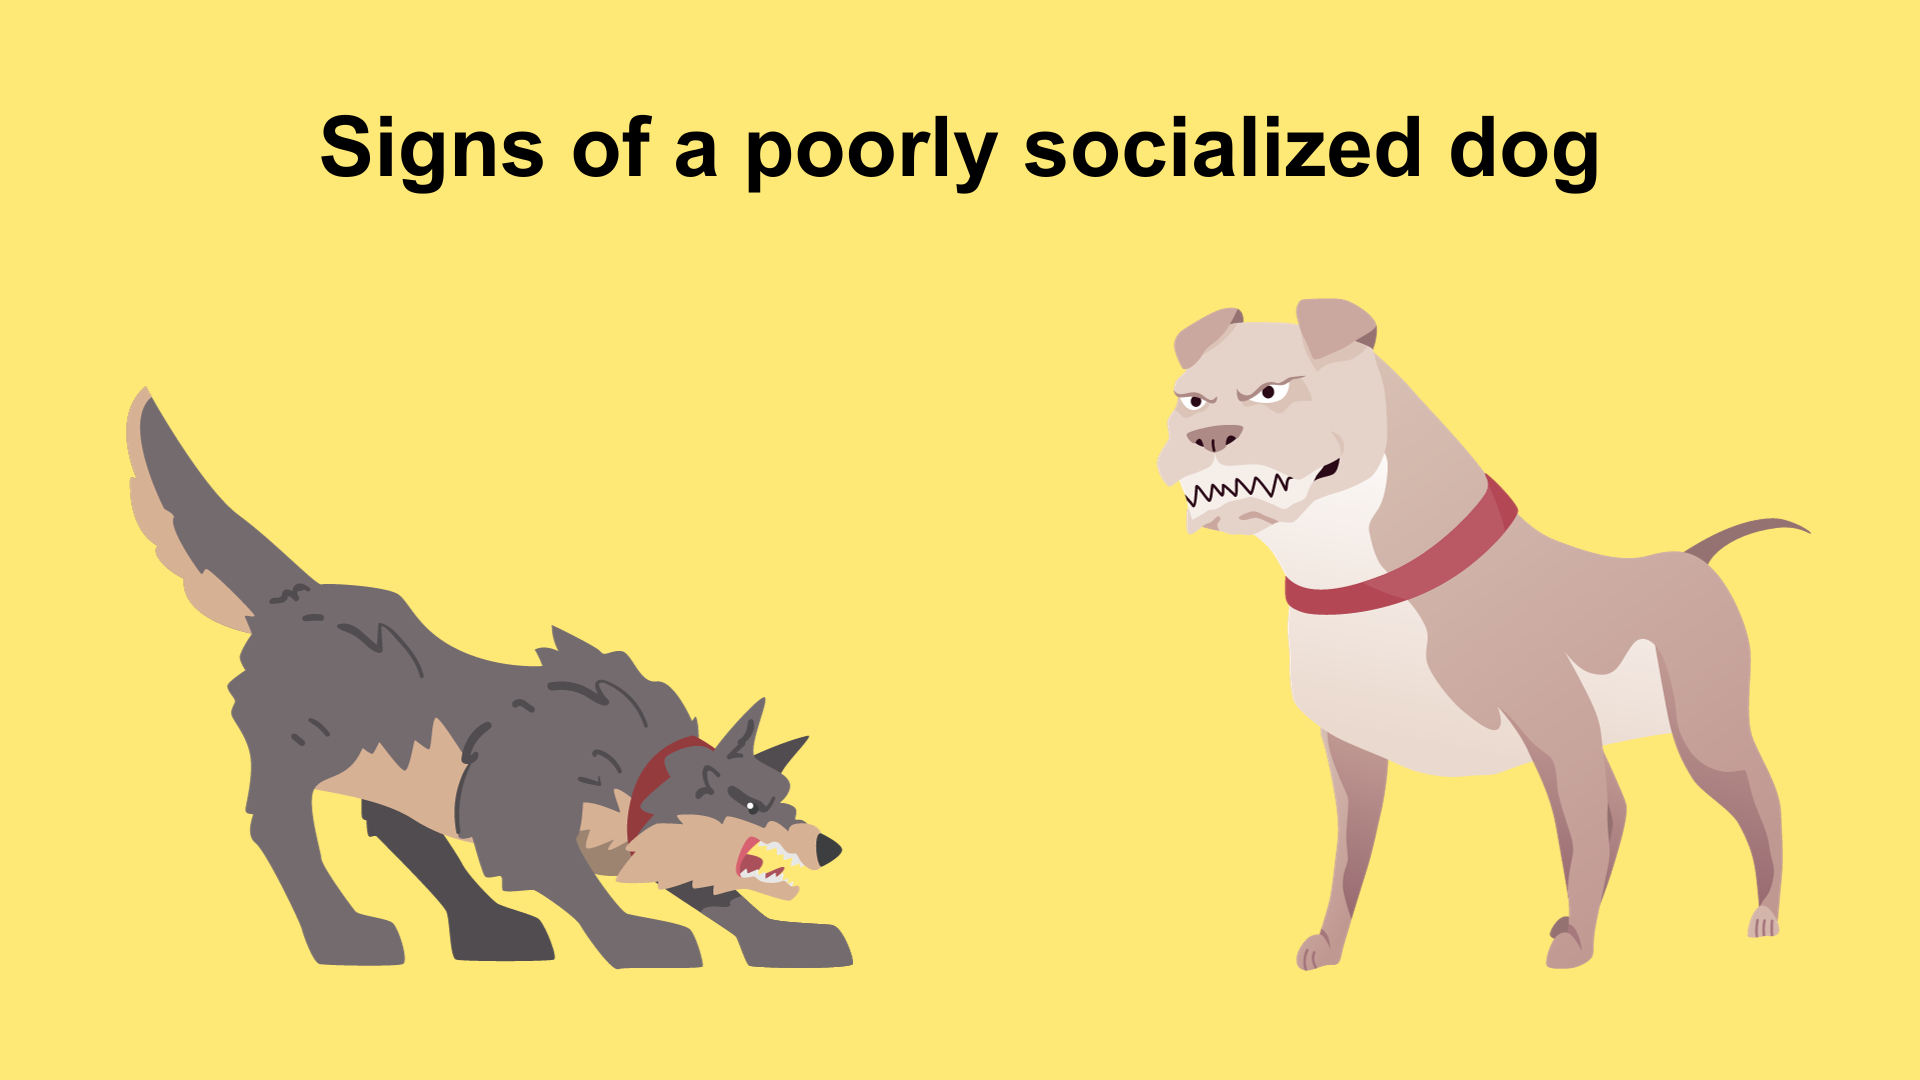 Signs of a poorly socialized dog